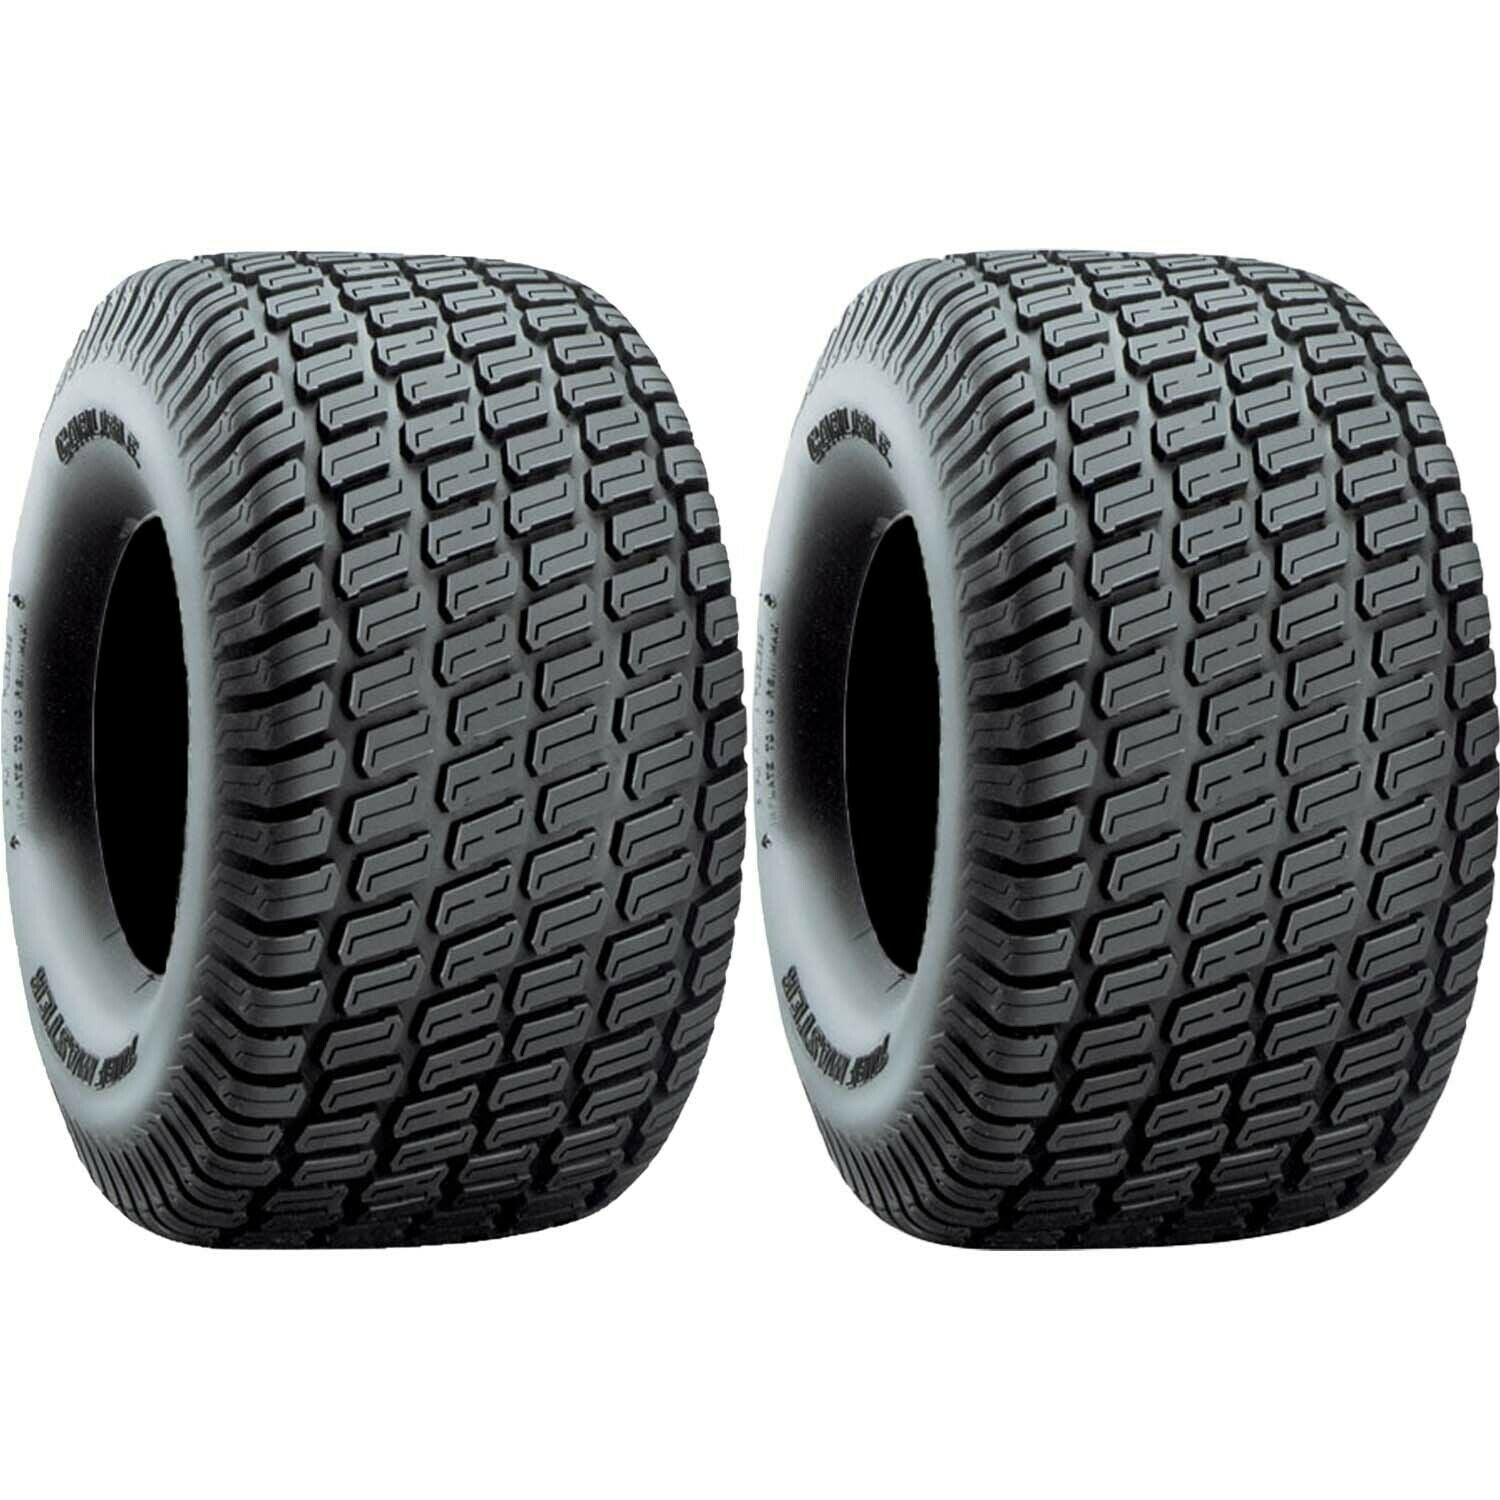 Carlisle Turf Master Lawn and Garden Tire 4Ply 16x7.50-8 - Pack of 2